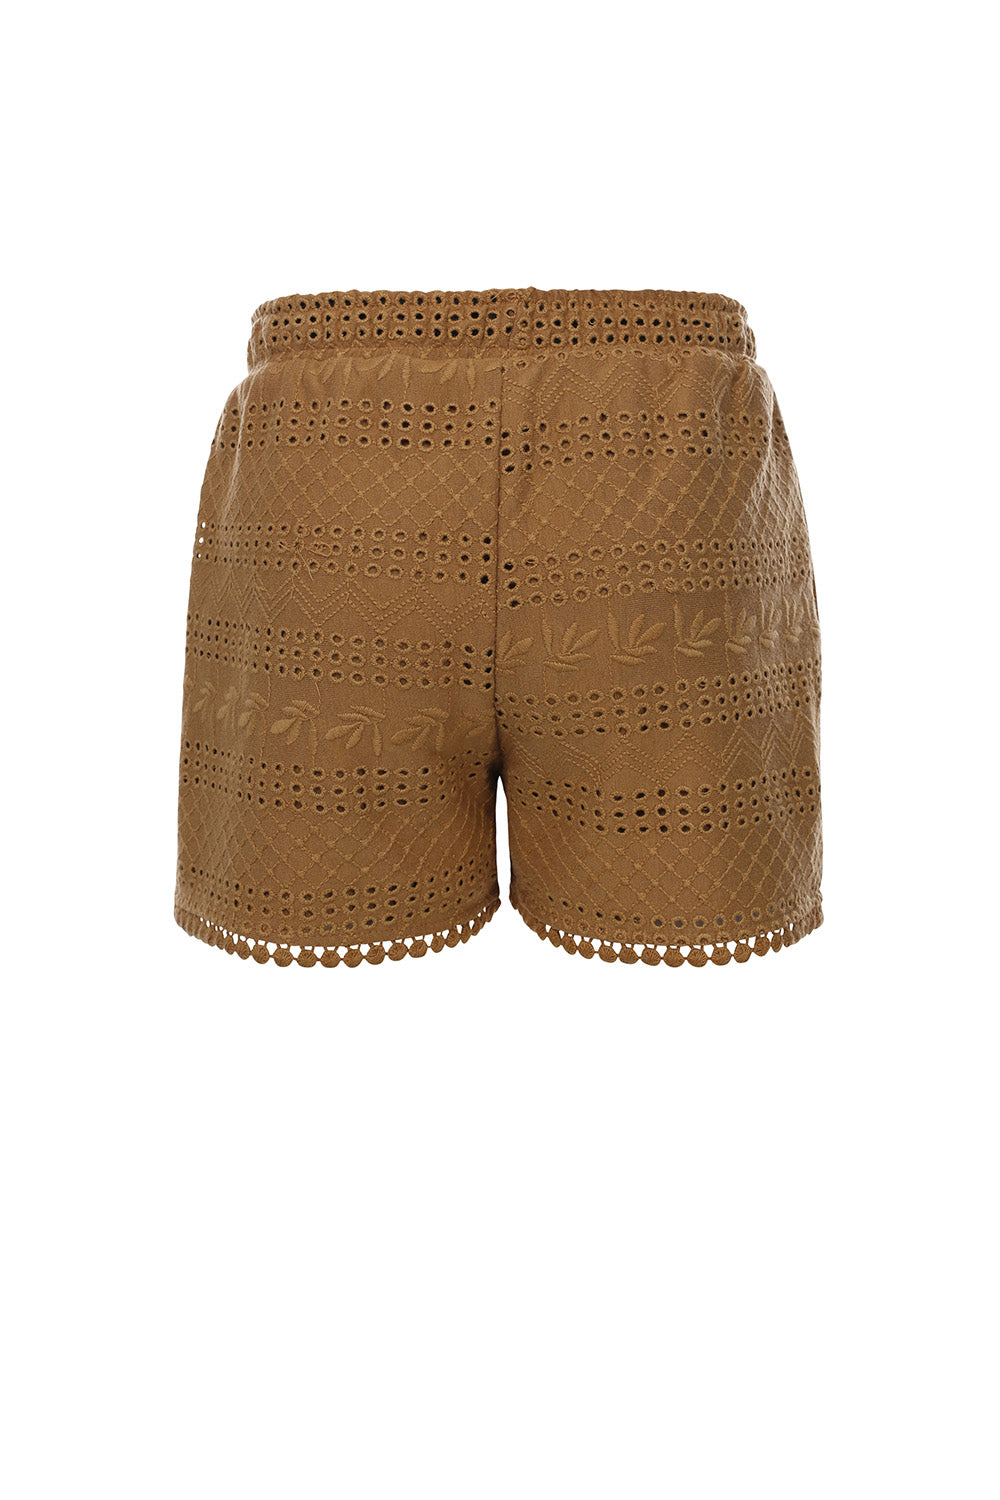 LOOXS Little Broidery Shorts